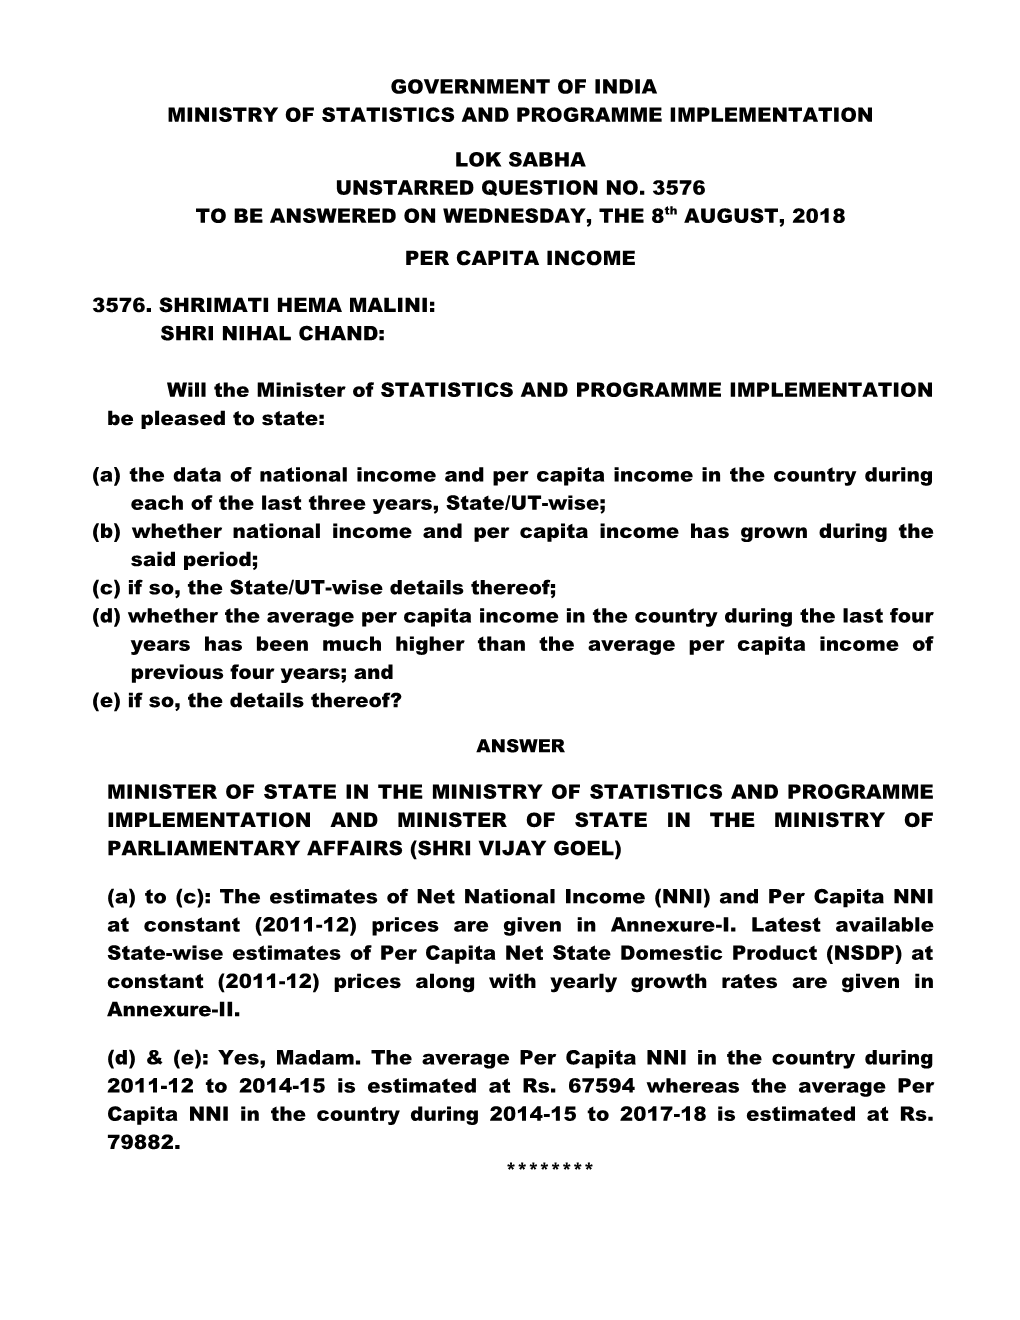 Government of India Ministry of Statistics and Programme Implementation